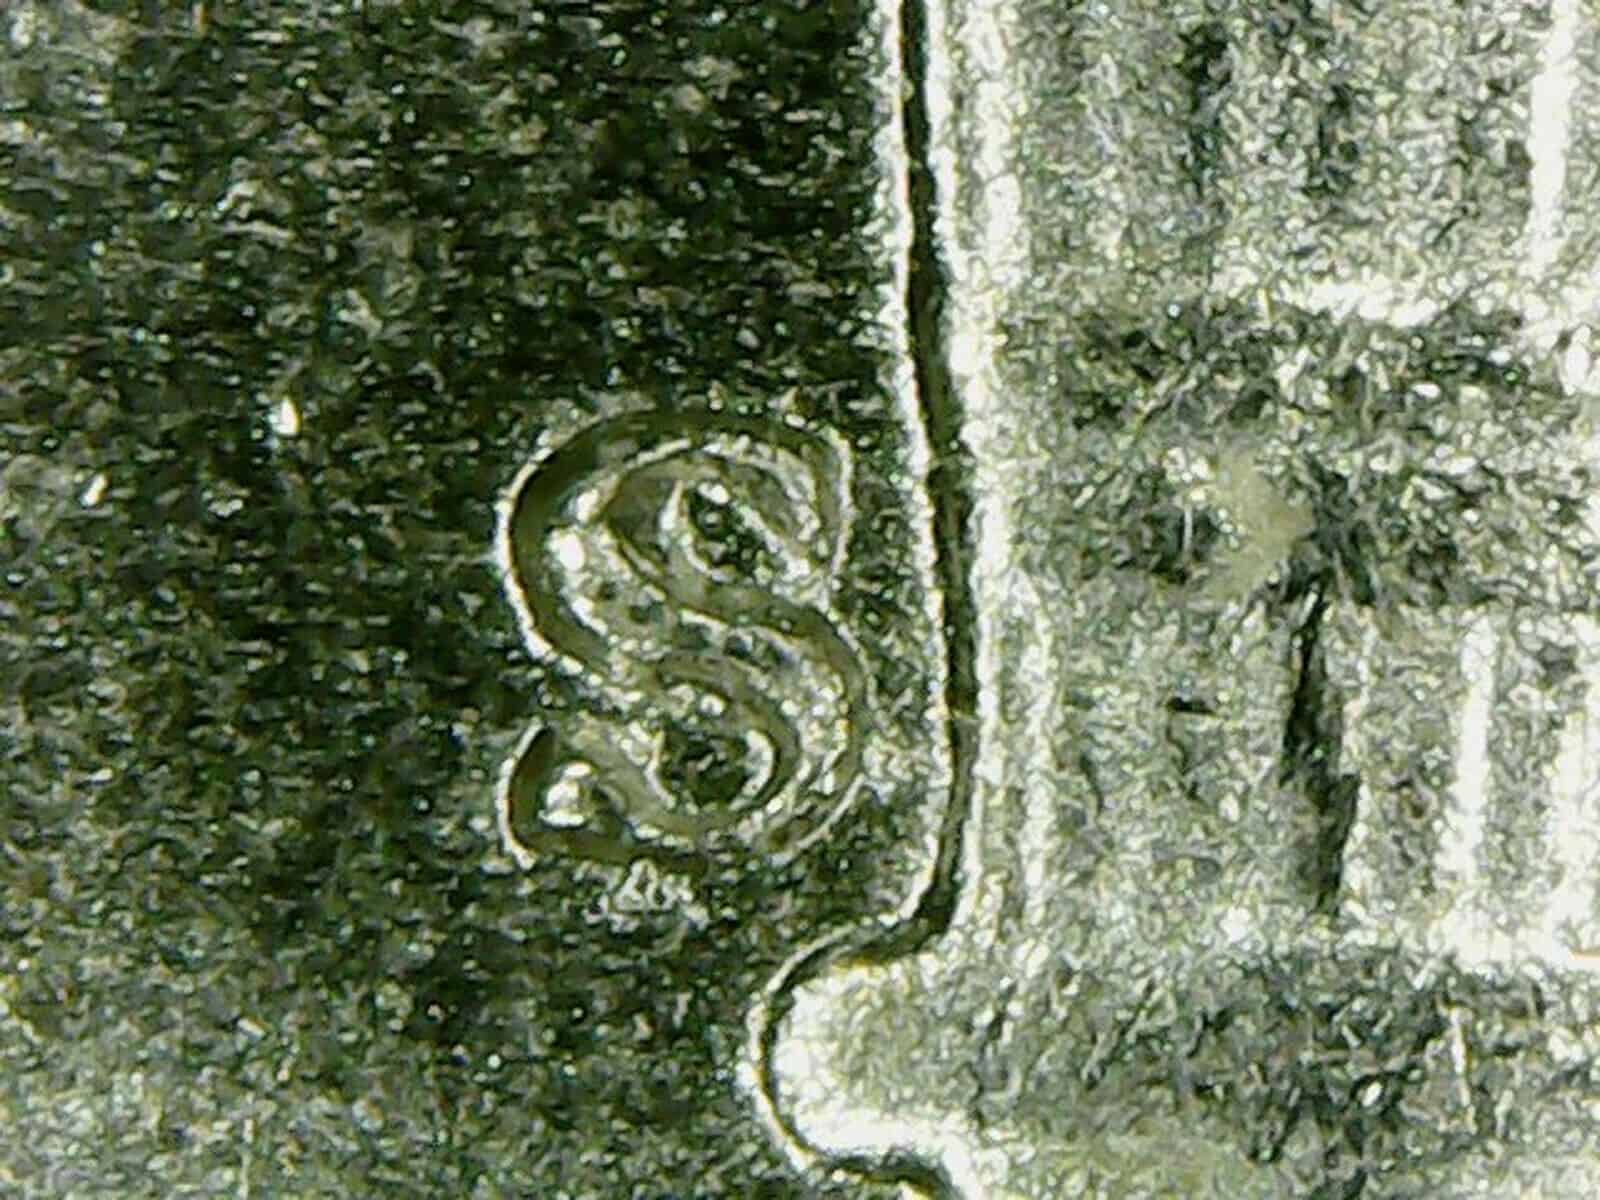 1946 Repunched Mint Mark Dime (D/D or S/S)